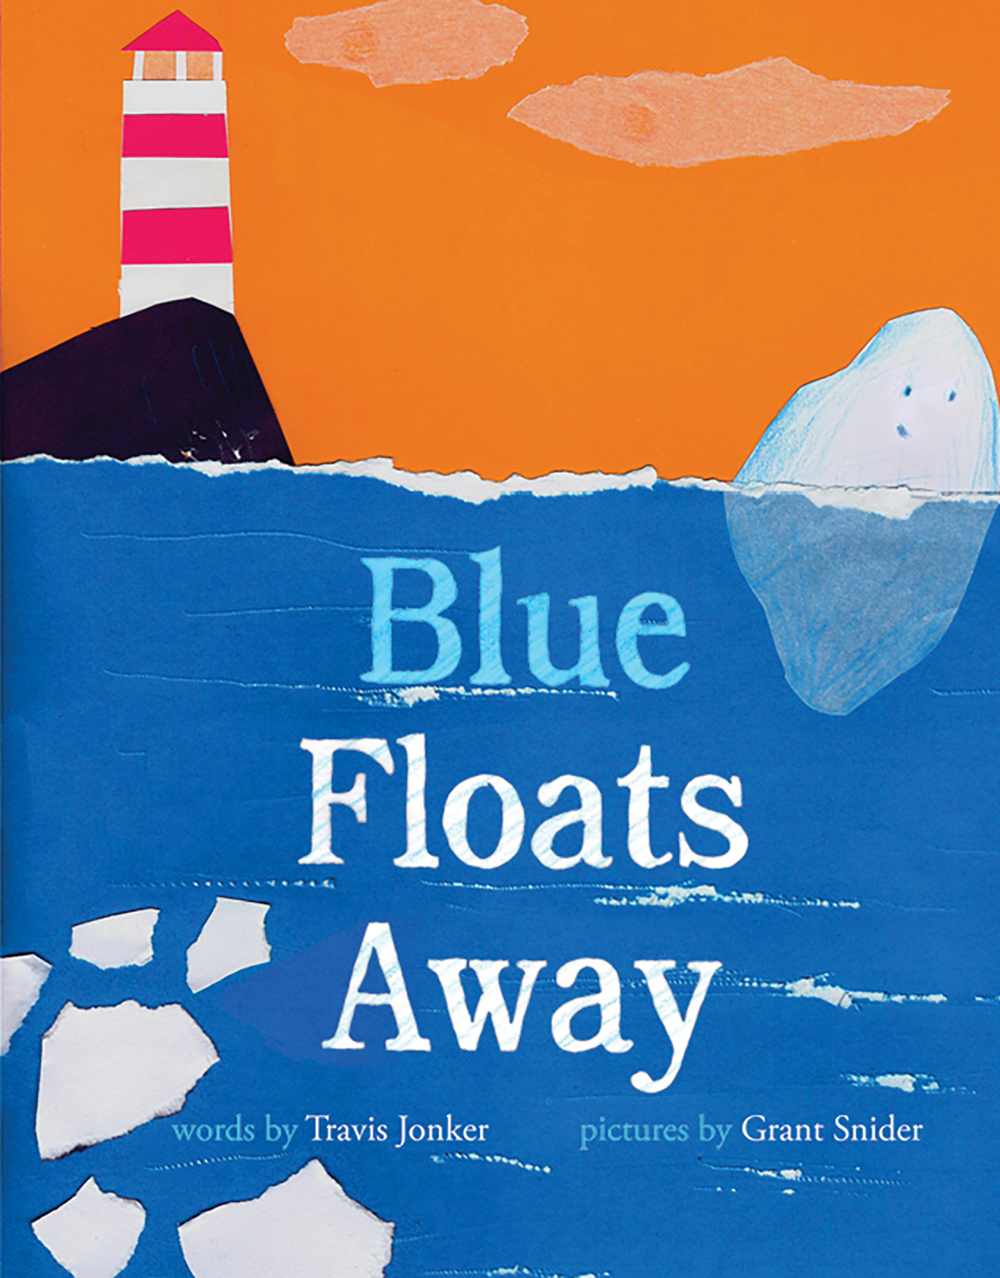 Blue Floats Away book cover